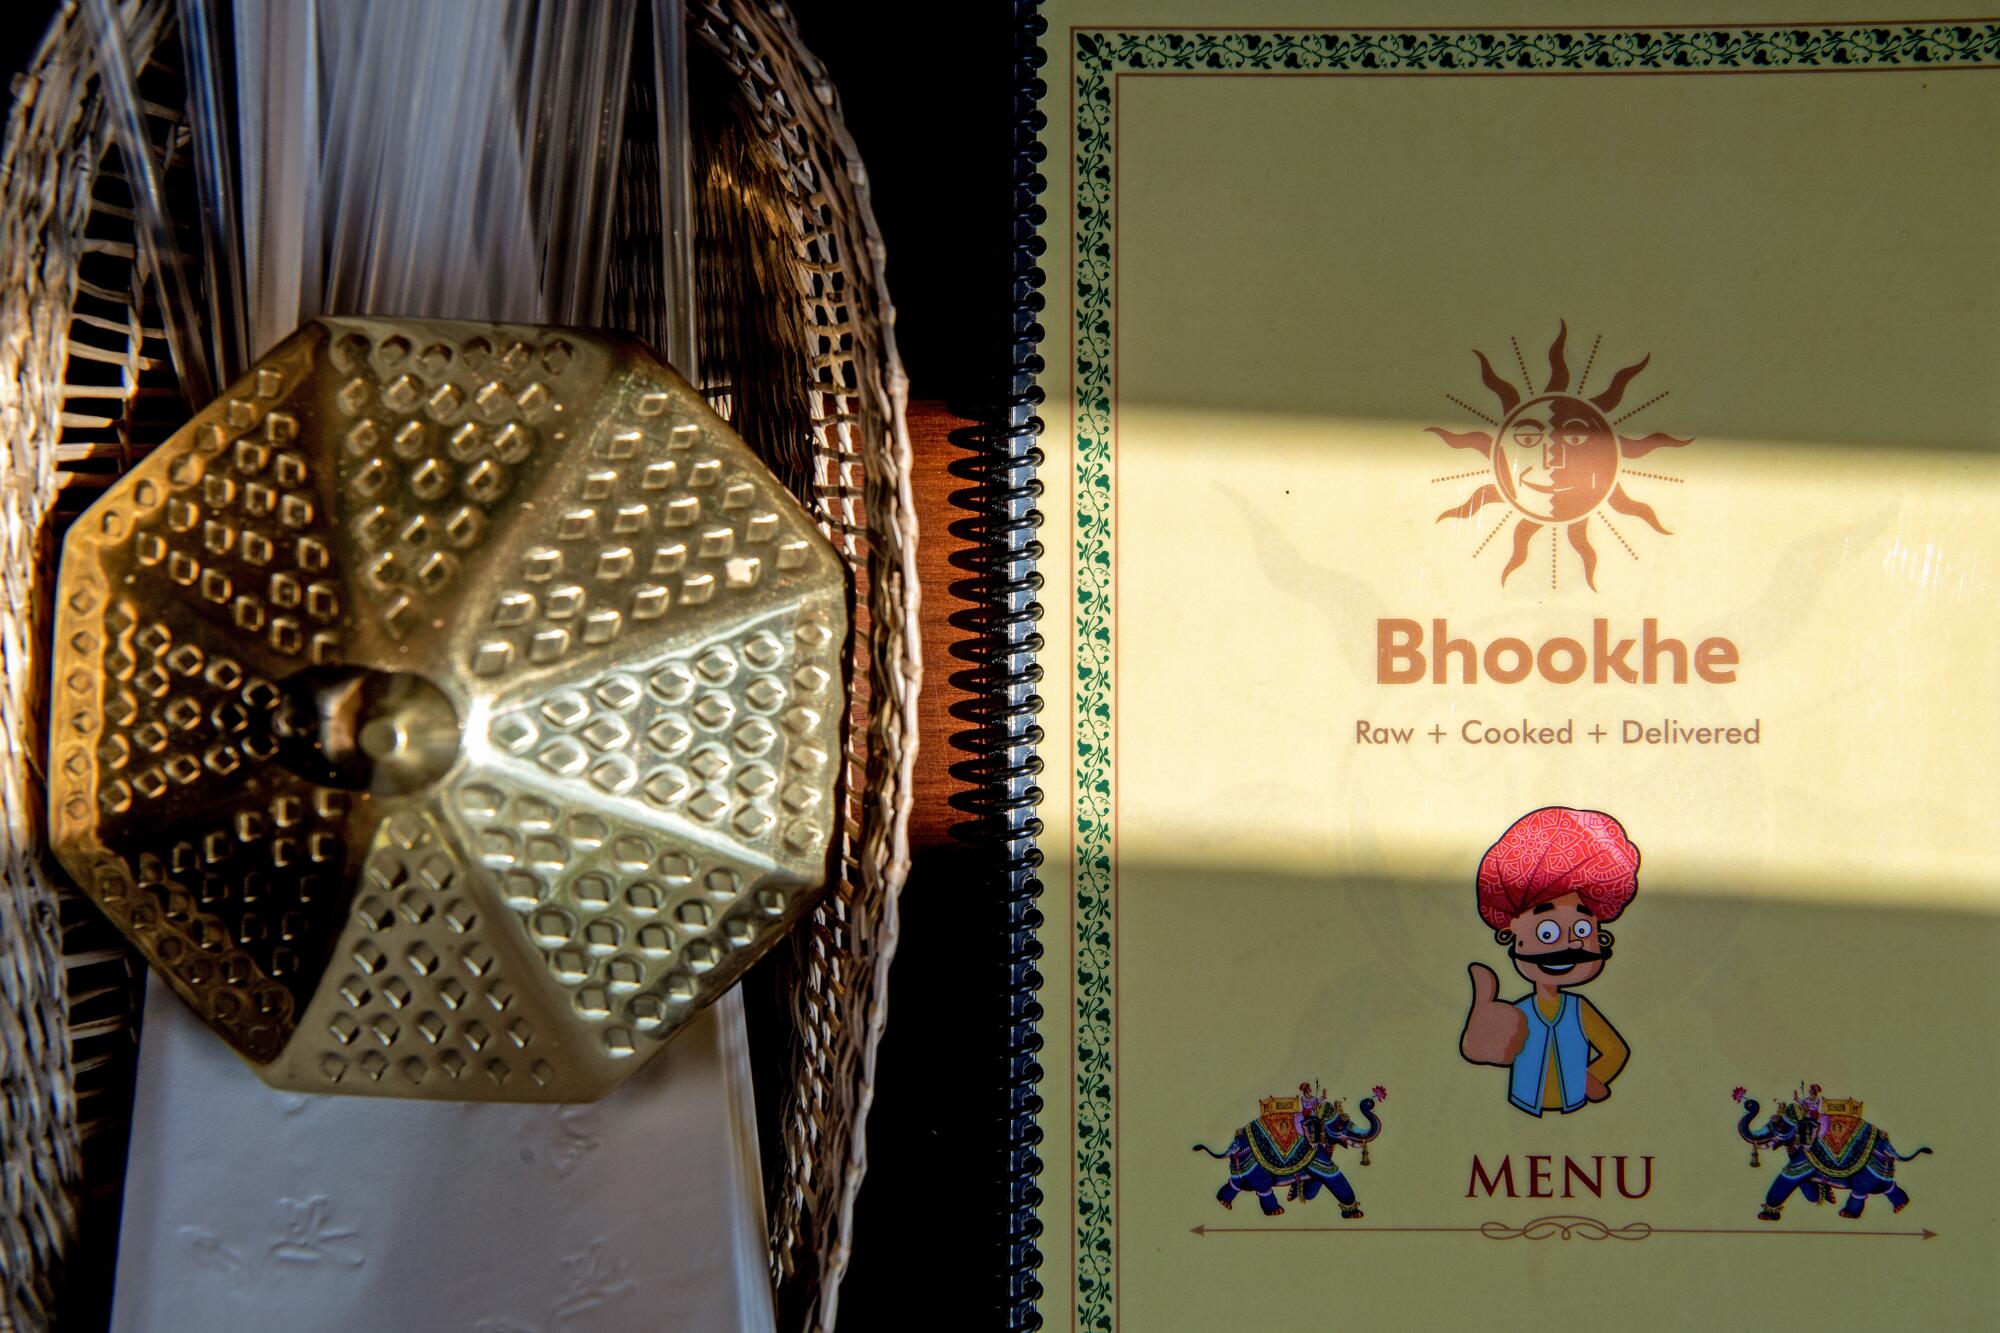 A Bhookhe menu atop a table in the restaurant